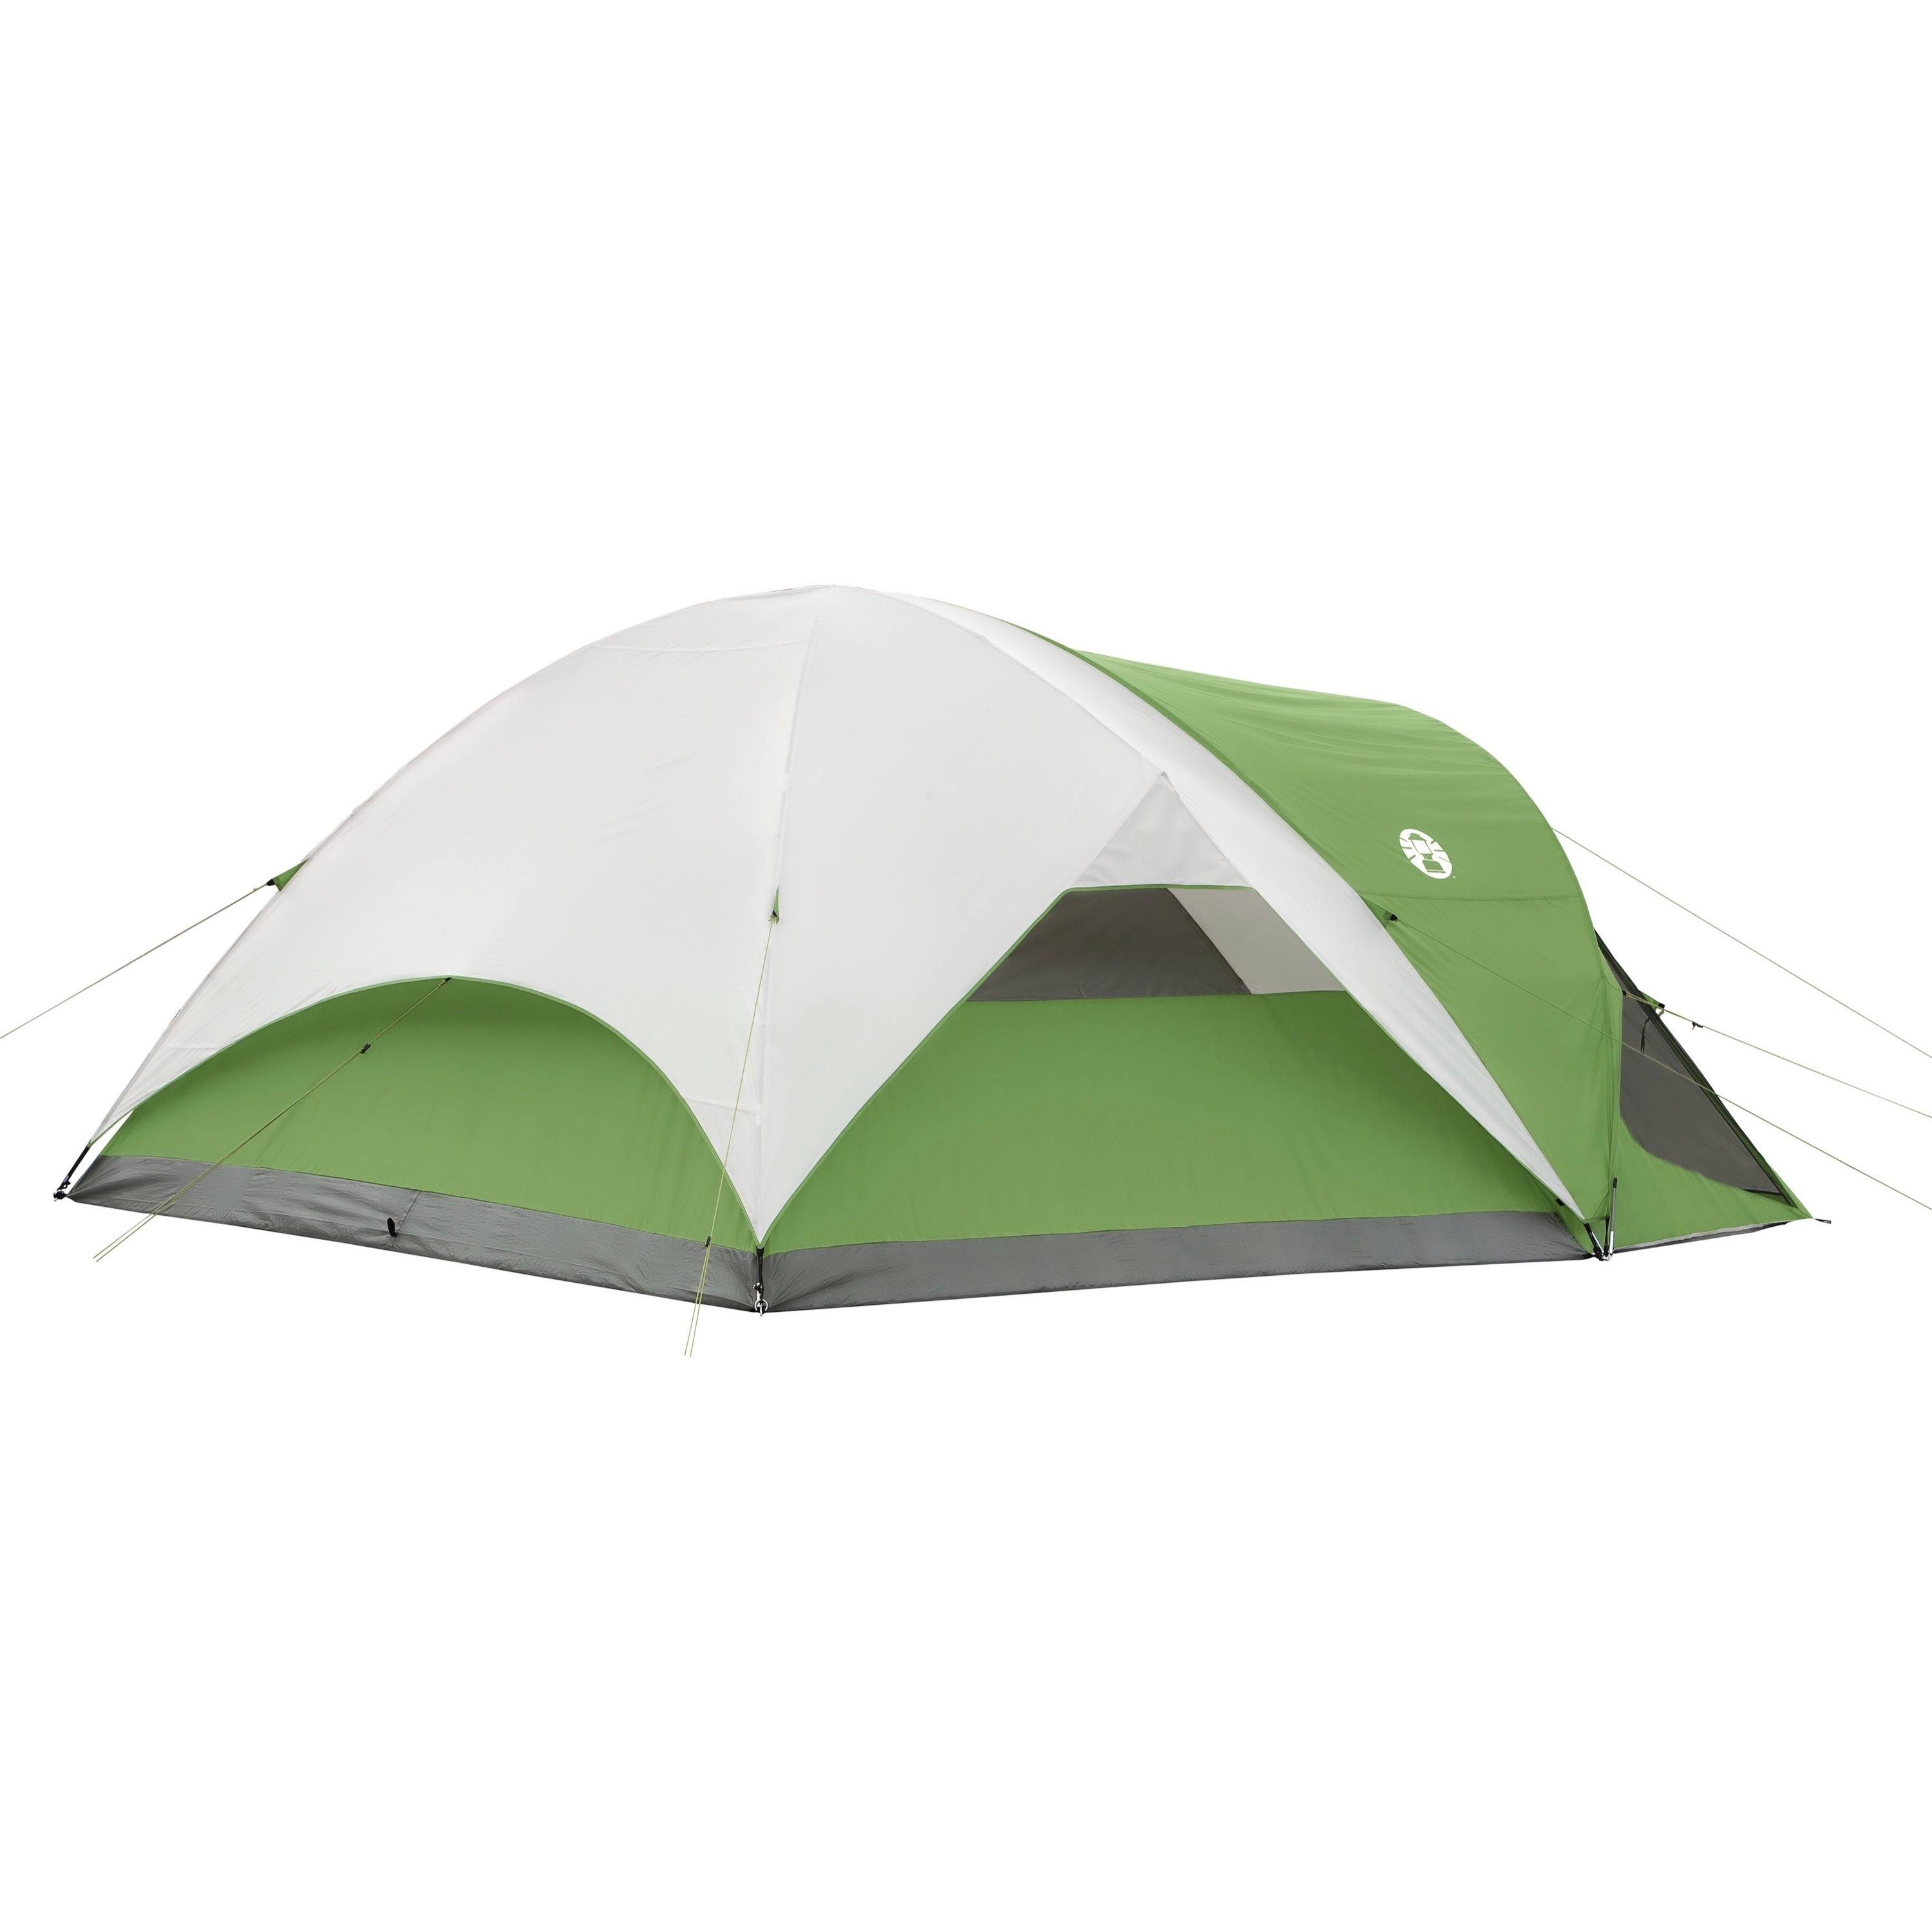 Coleman Evanston 8-Person Tent with Screen Room - image 5 of 5